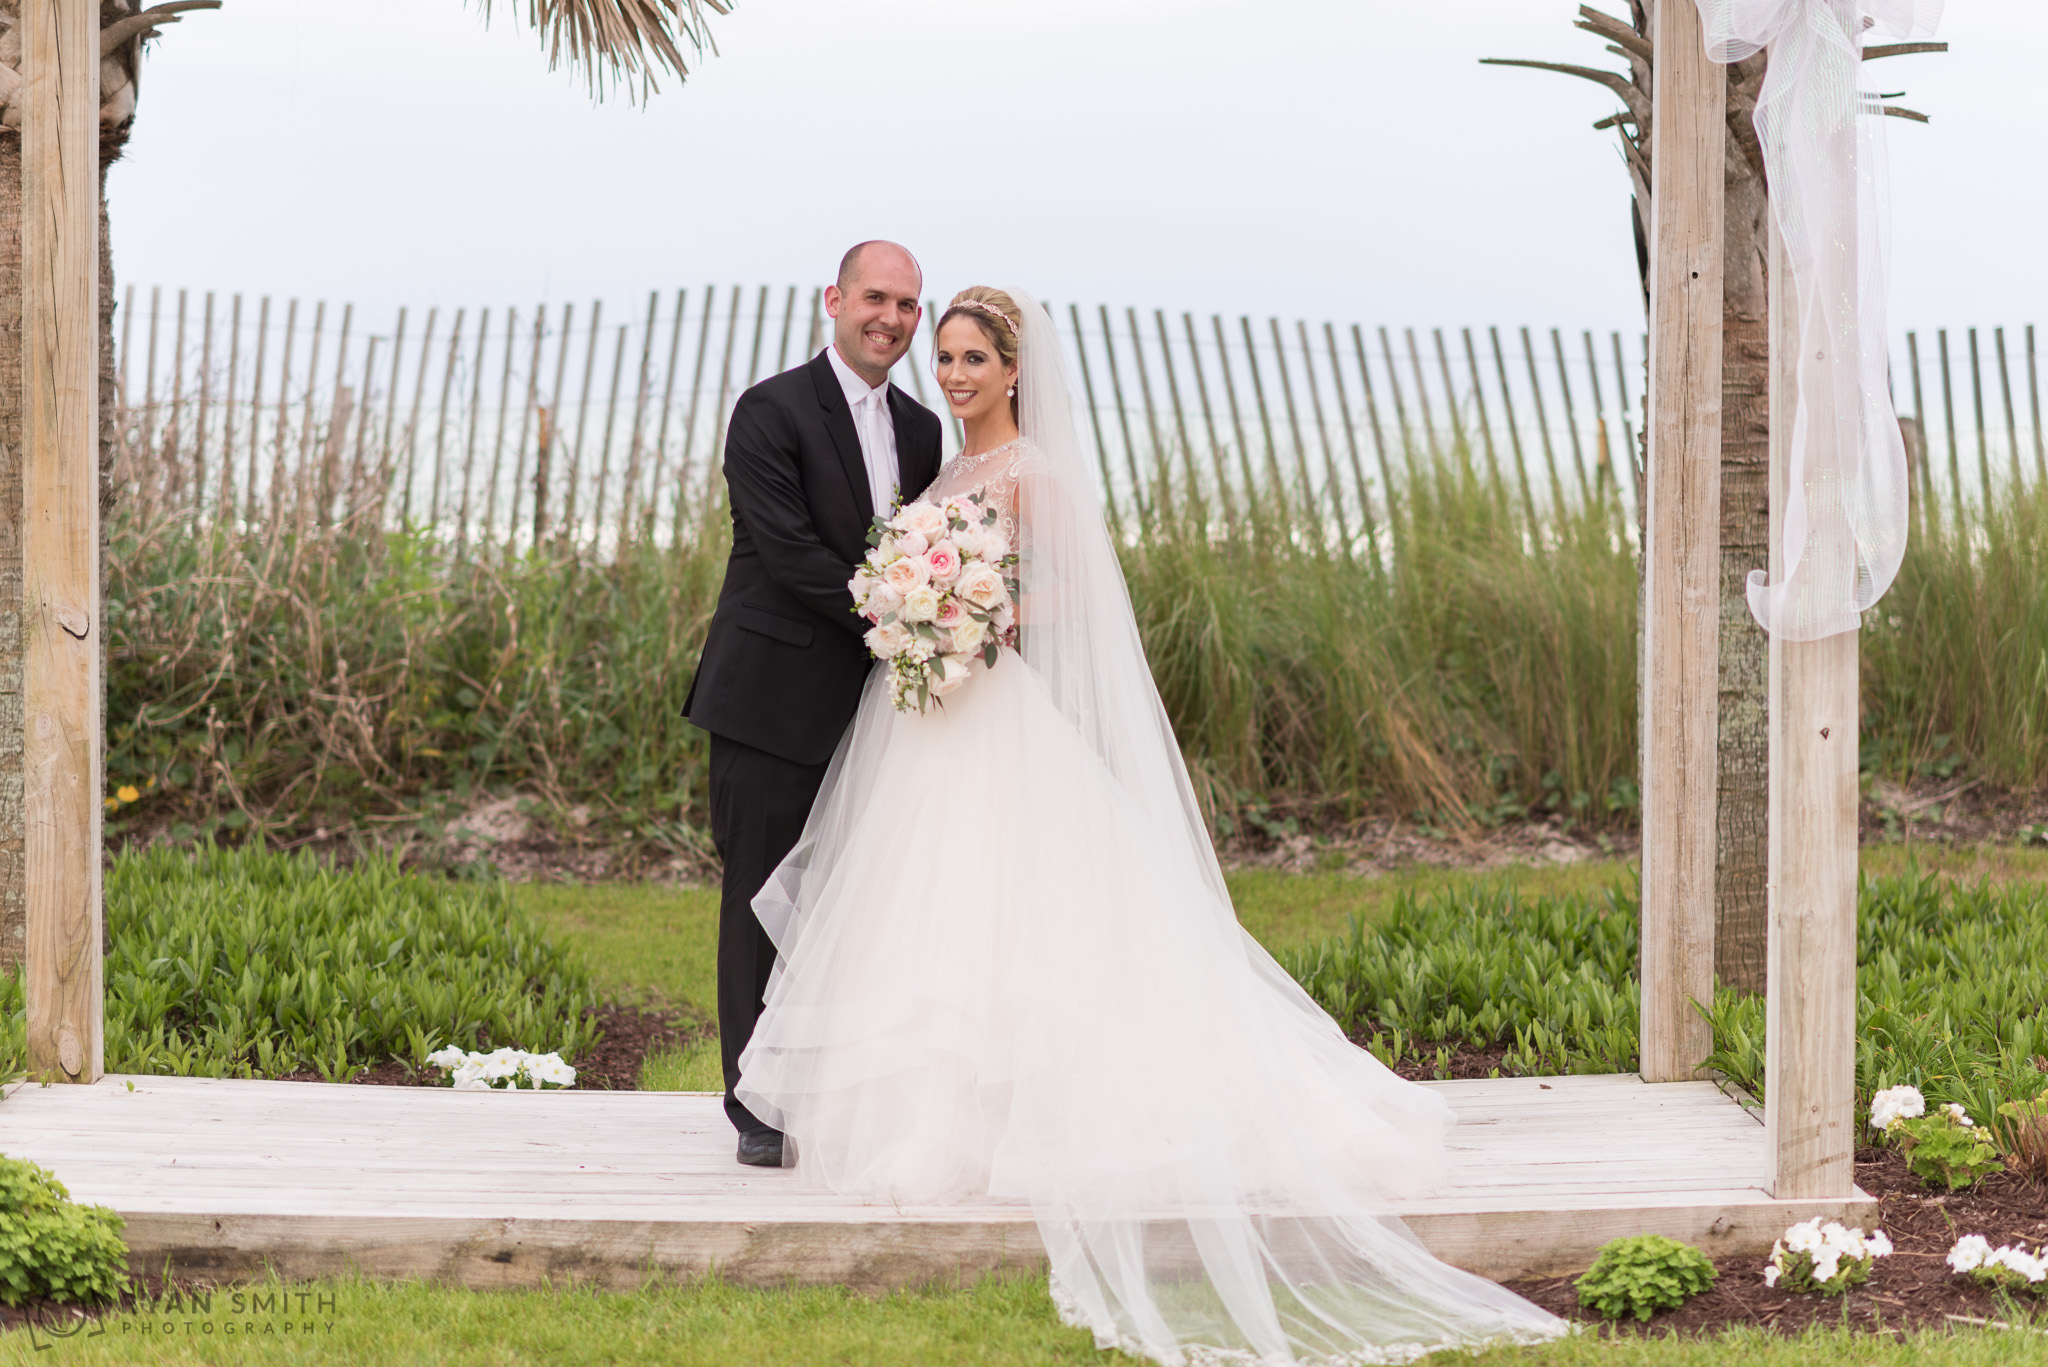 Bride and groom standing at ceremony location Hilton Myrtle Beach Resort